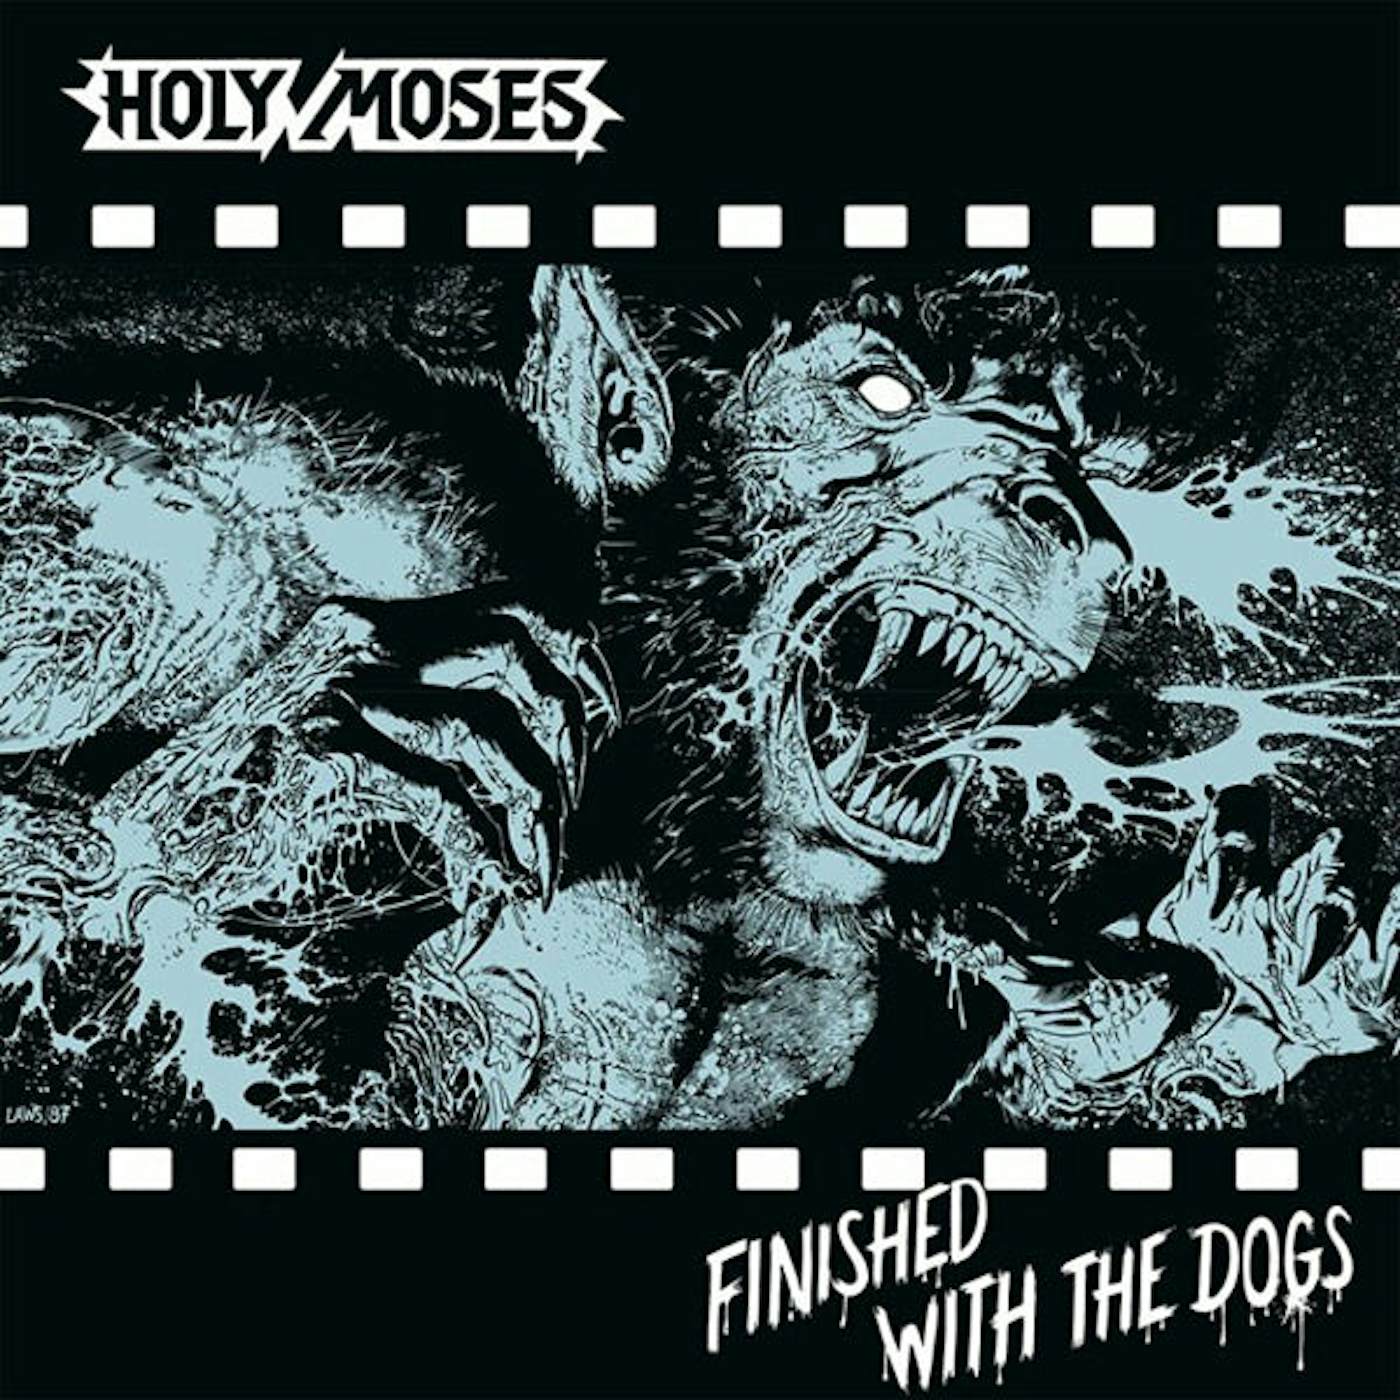 Holy Moses LP - Finished With The Dogs (Vinyl)